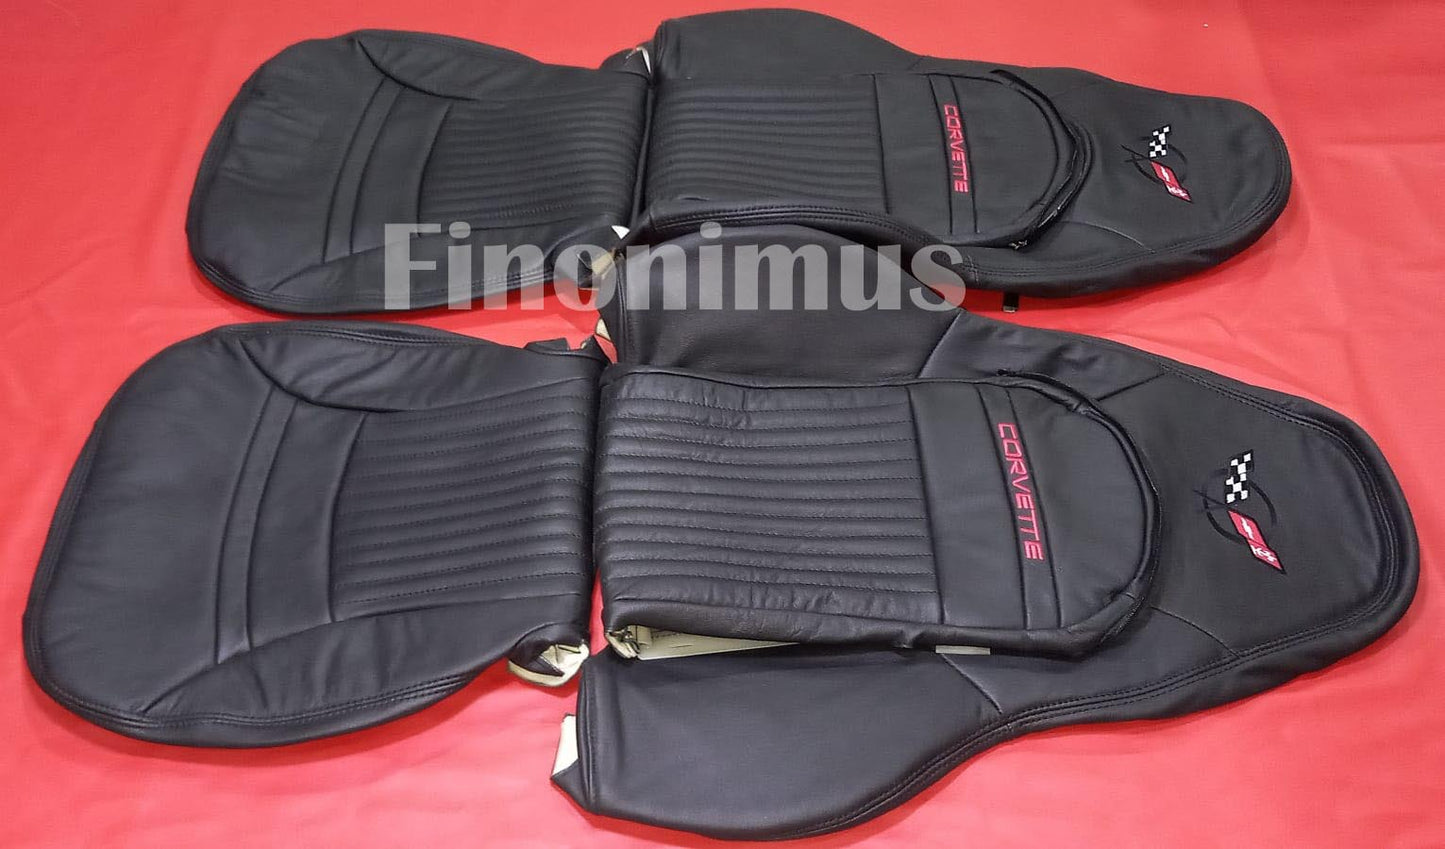 C5 Corvette Sports seat cover Genuine Leather ; Color Black (Year 1997 to 2004) - Front 2 Seat Covers